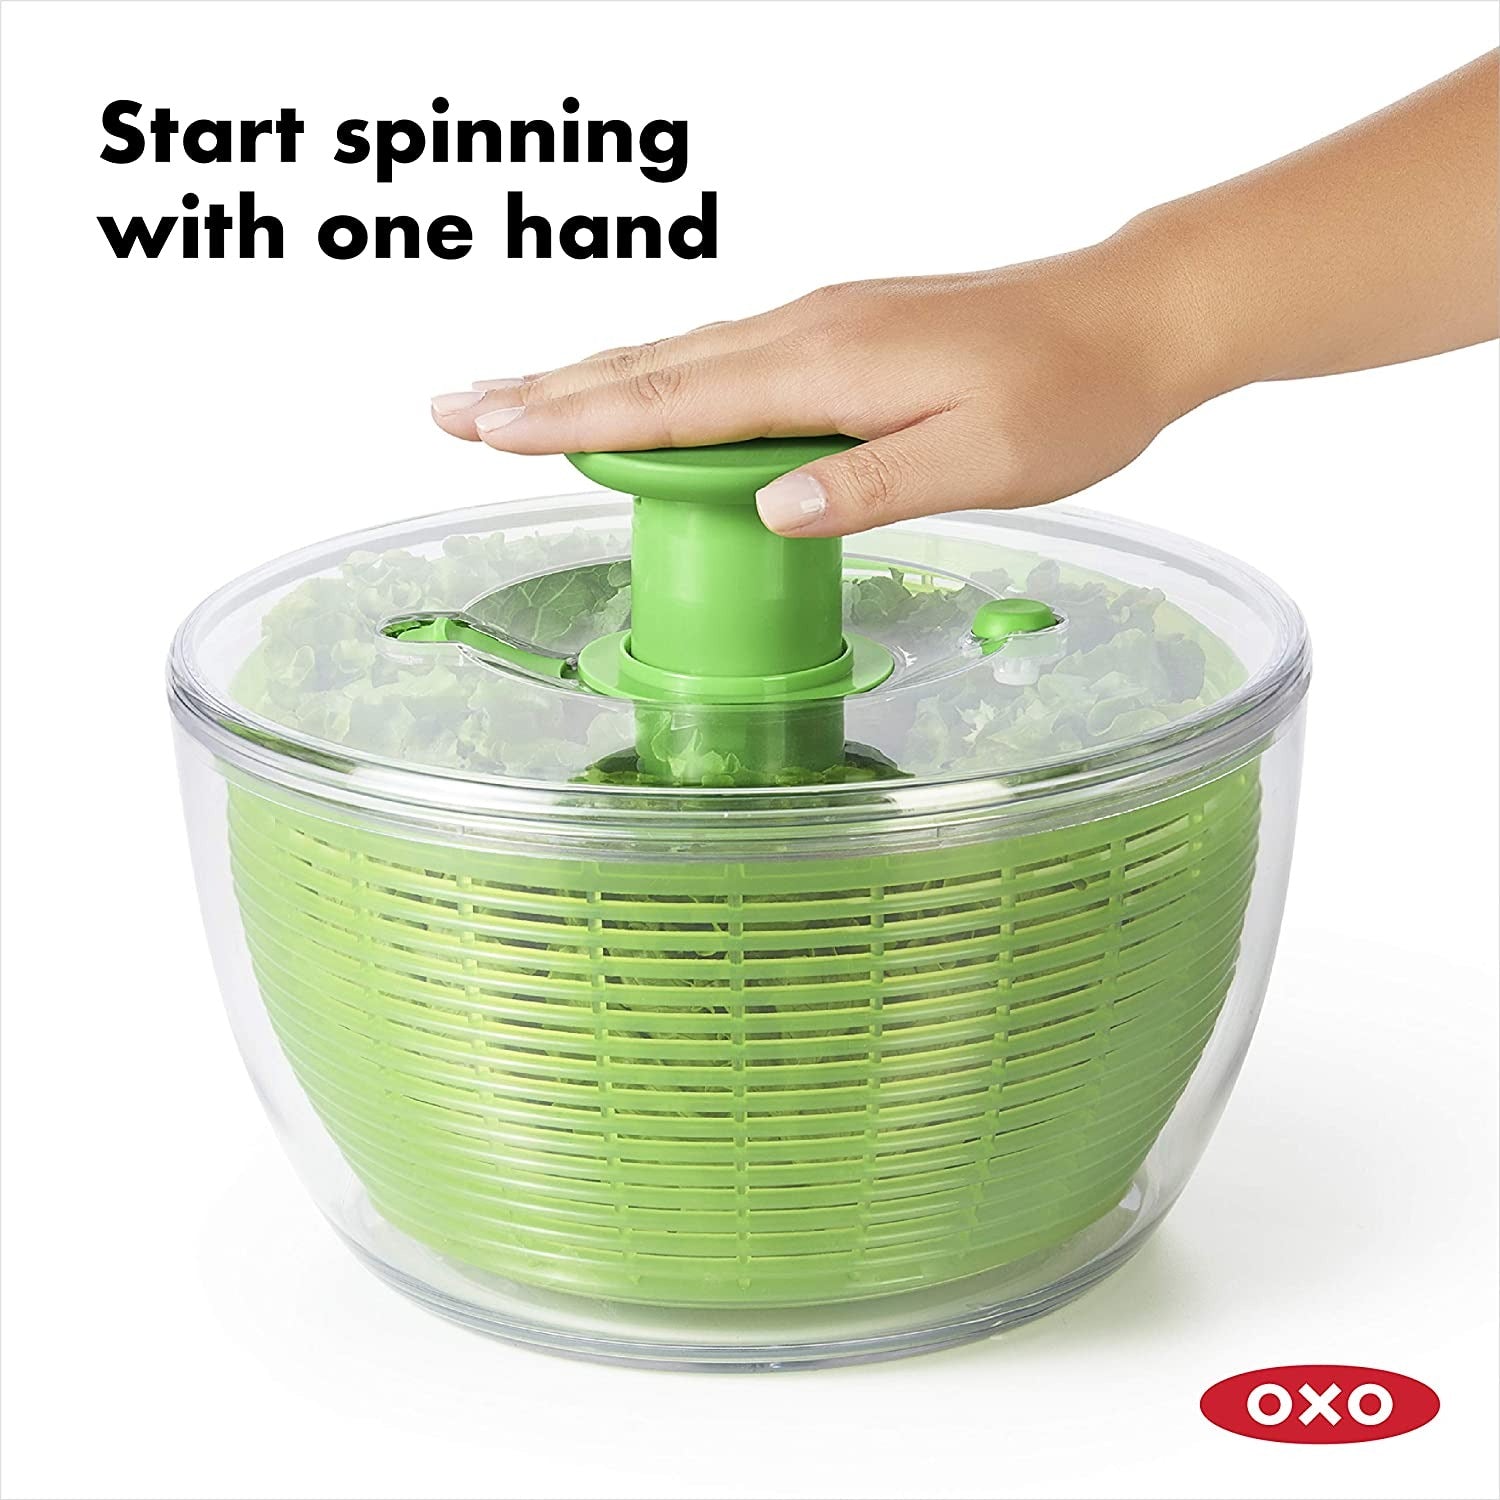 Zyliss Easy Spin 2 Stainless Steel Salad Spinner